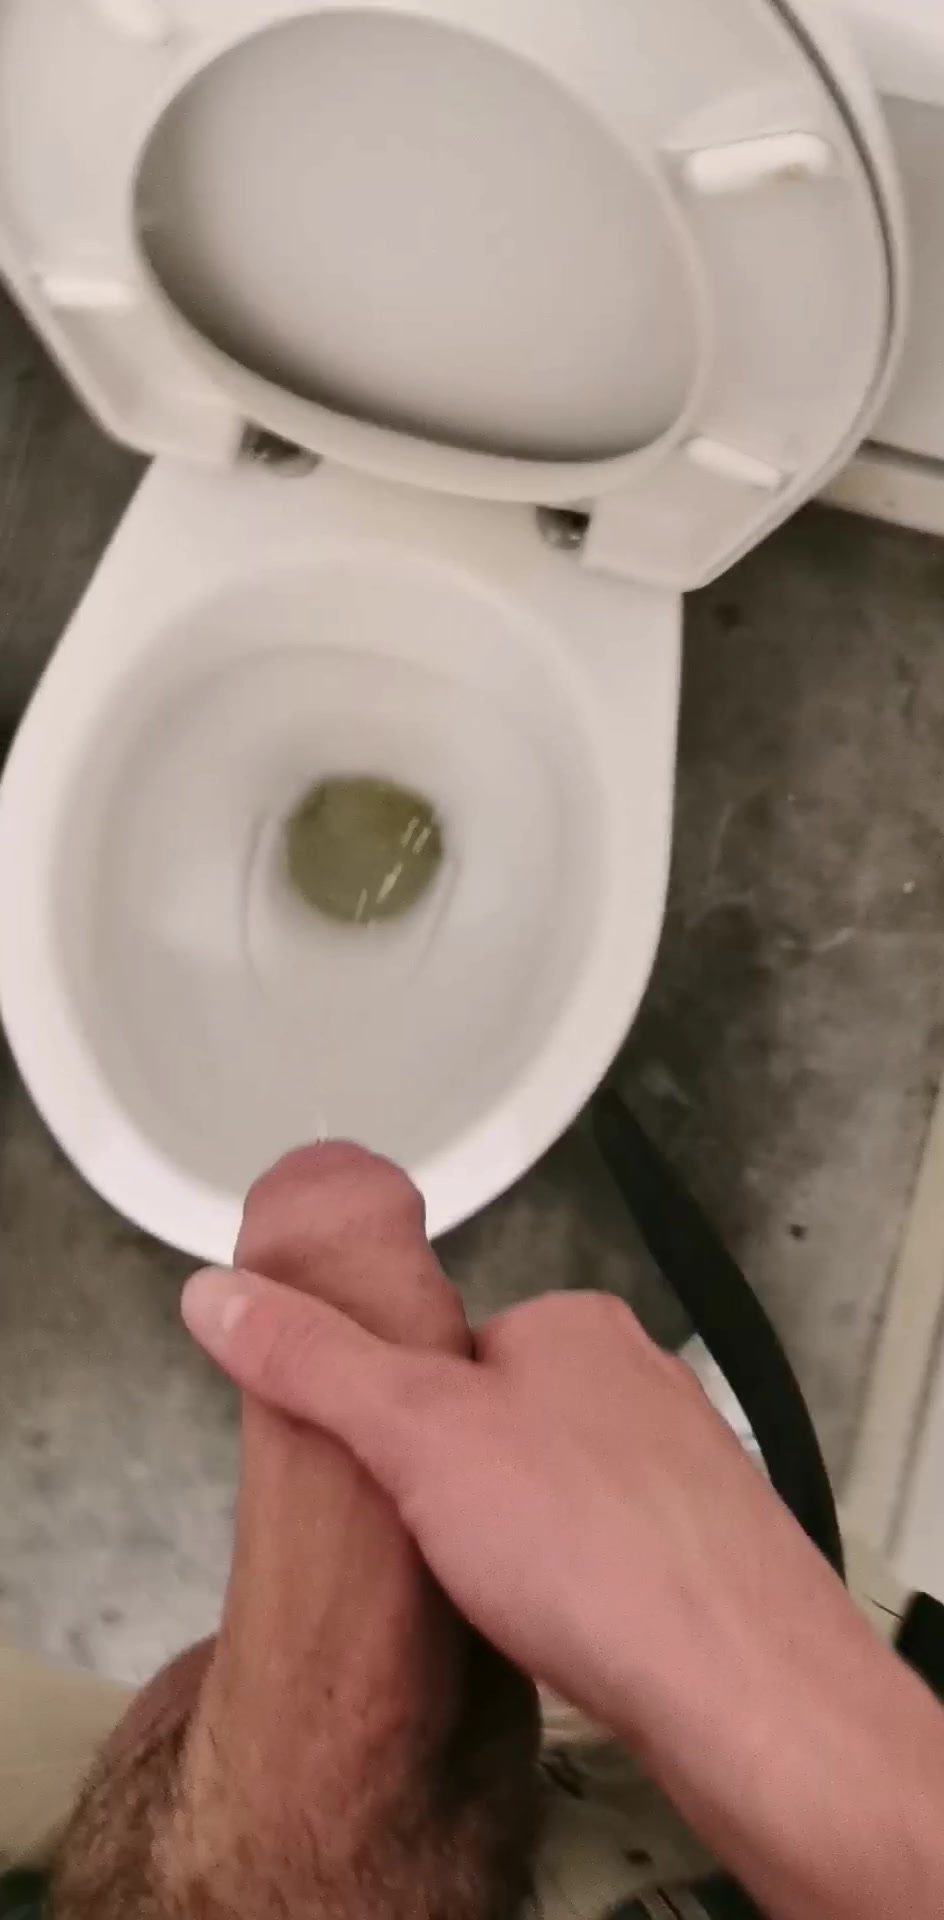 Piss mess at work 2